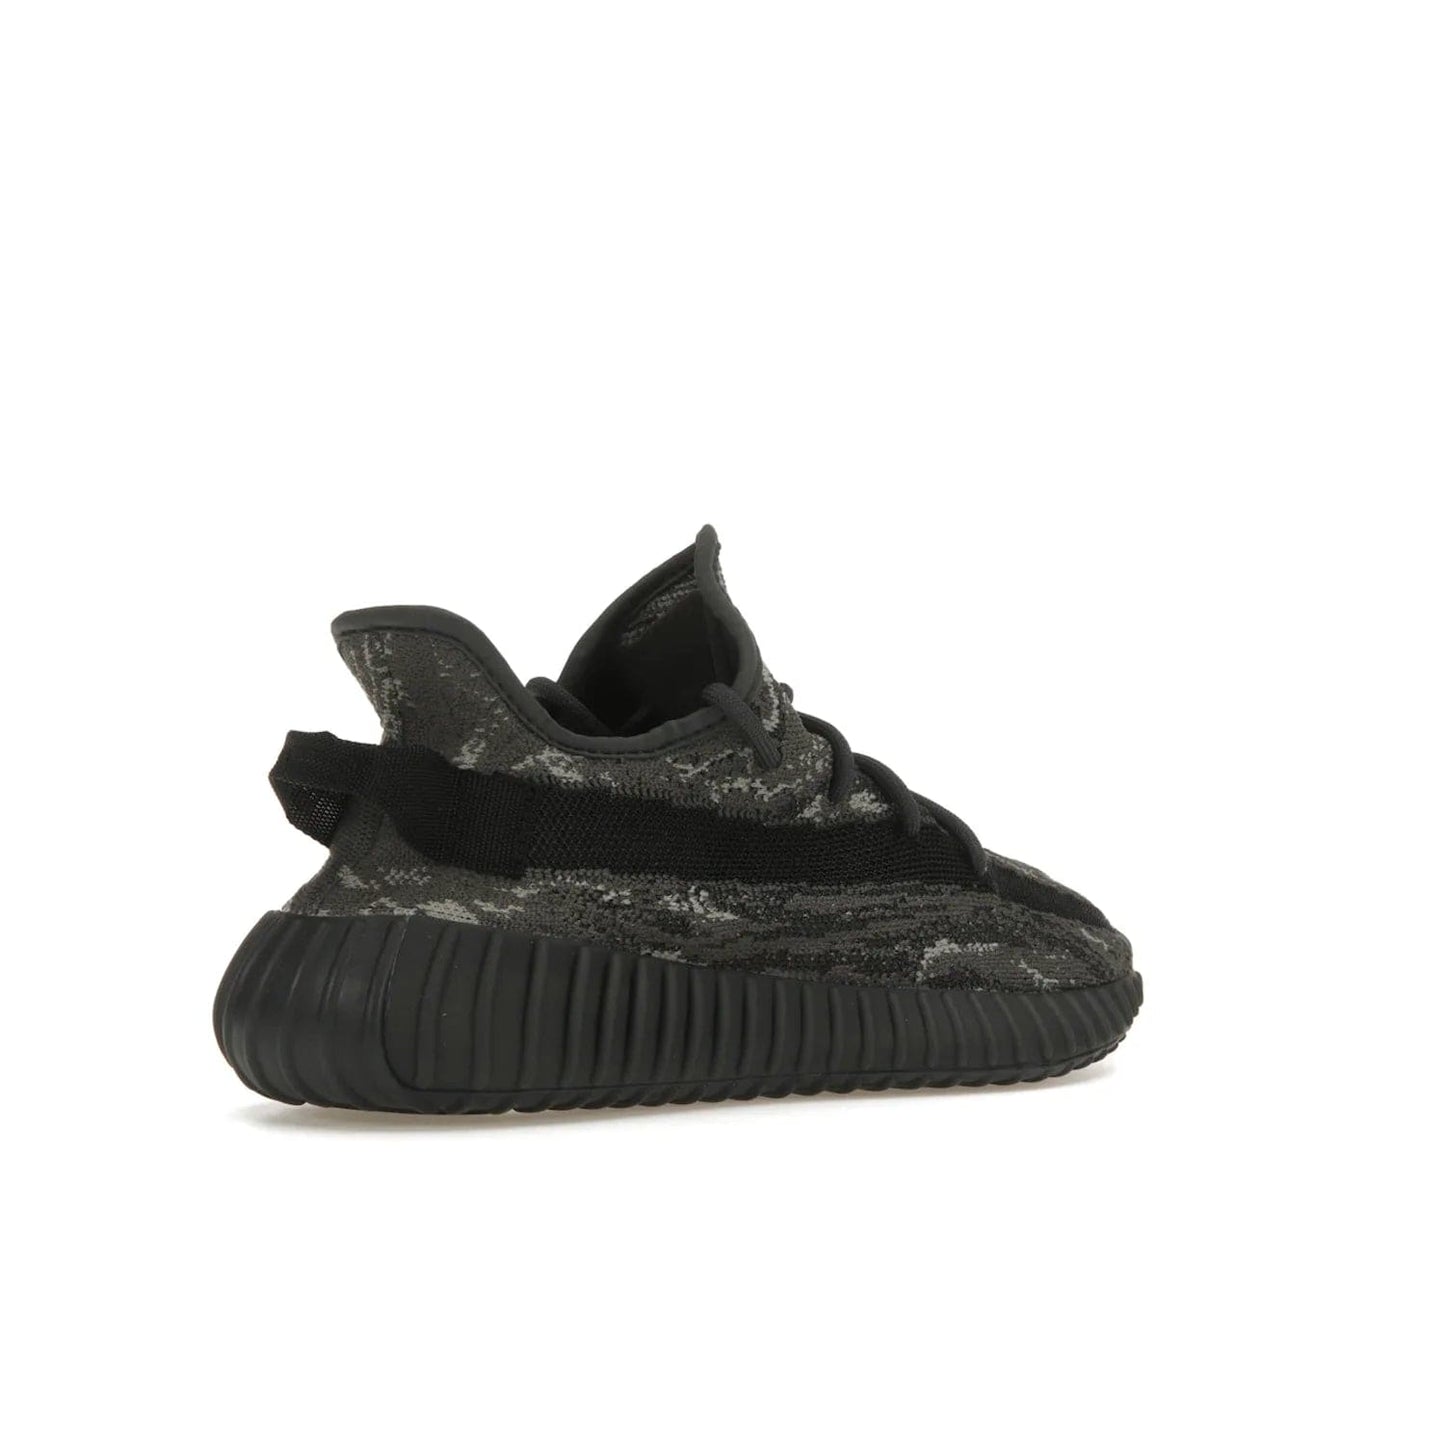 adidas Yeezy Boost 350 V2 MX Dark Salt - Image 33 - Only at www.BallersClubKickz.com - ##
The adidas Yeezy Boost 350 V2 MX Dark Salt offers a contemporary look with a signature combination of grey and black hues. Cushioned Boost midsole and side stripe allow for all day wear. Get the perfect fashion-forward addition with this sleek sneaker for $230.